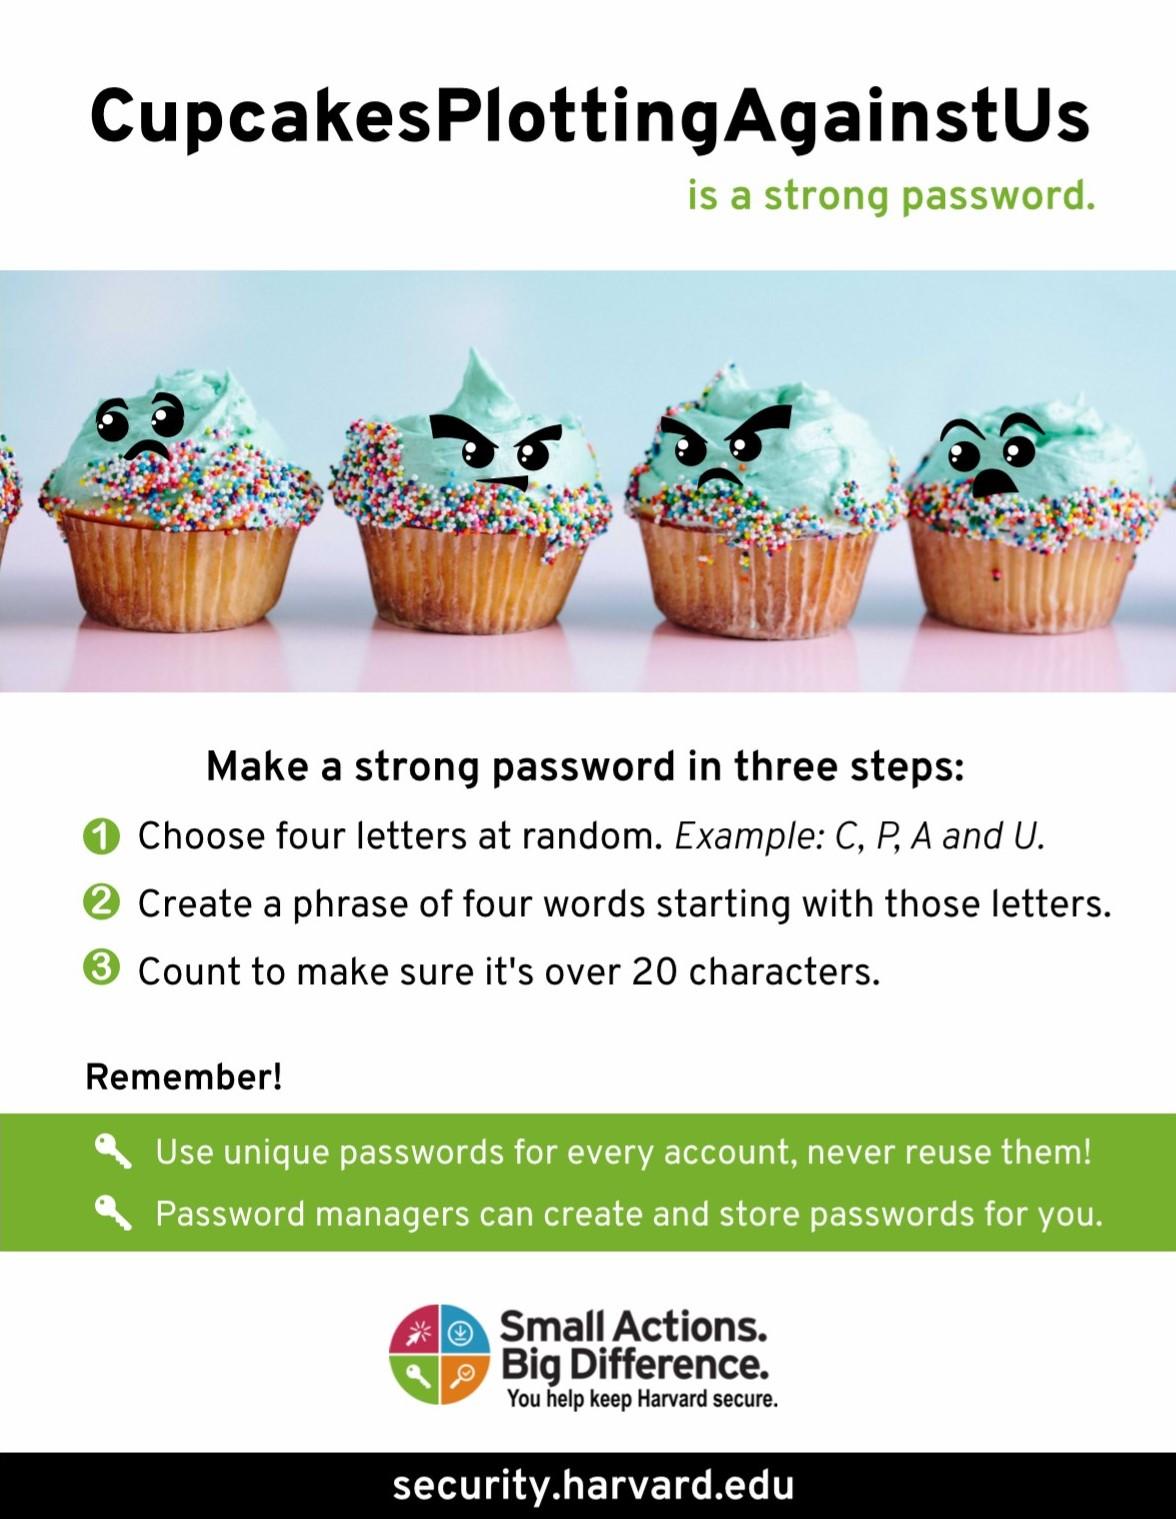 Thumbnail of Infographic featuring four cupcakes and the passphrase CupcakesPlottingAgainstUs.